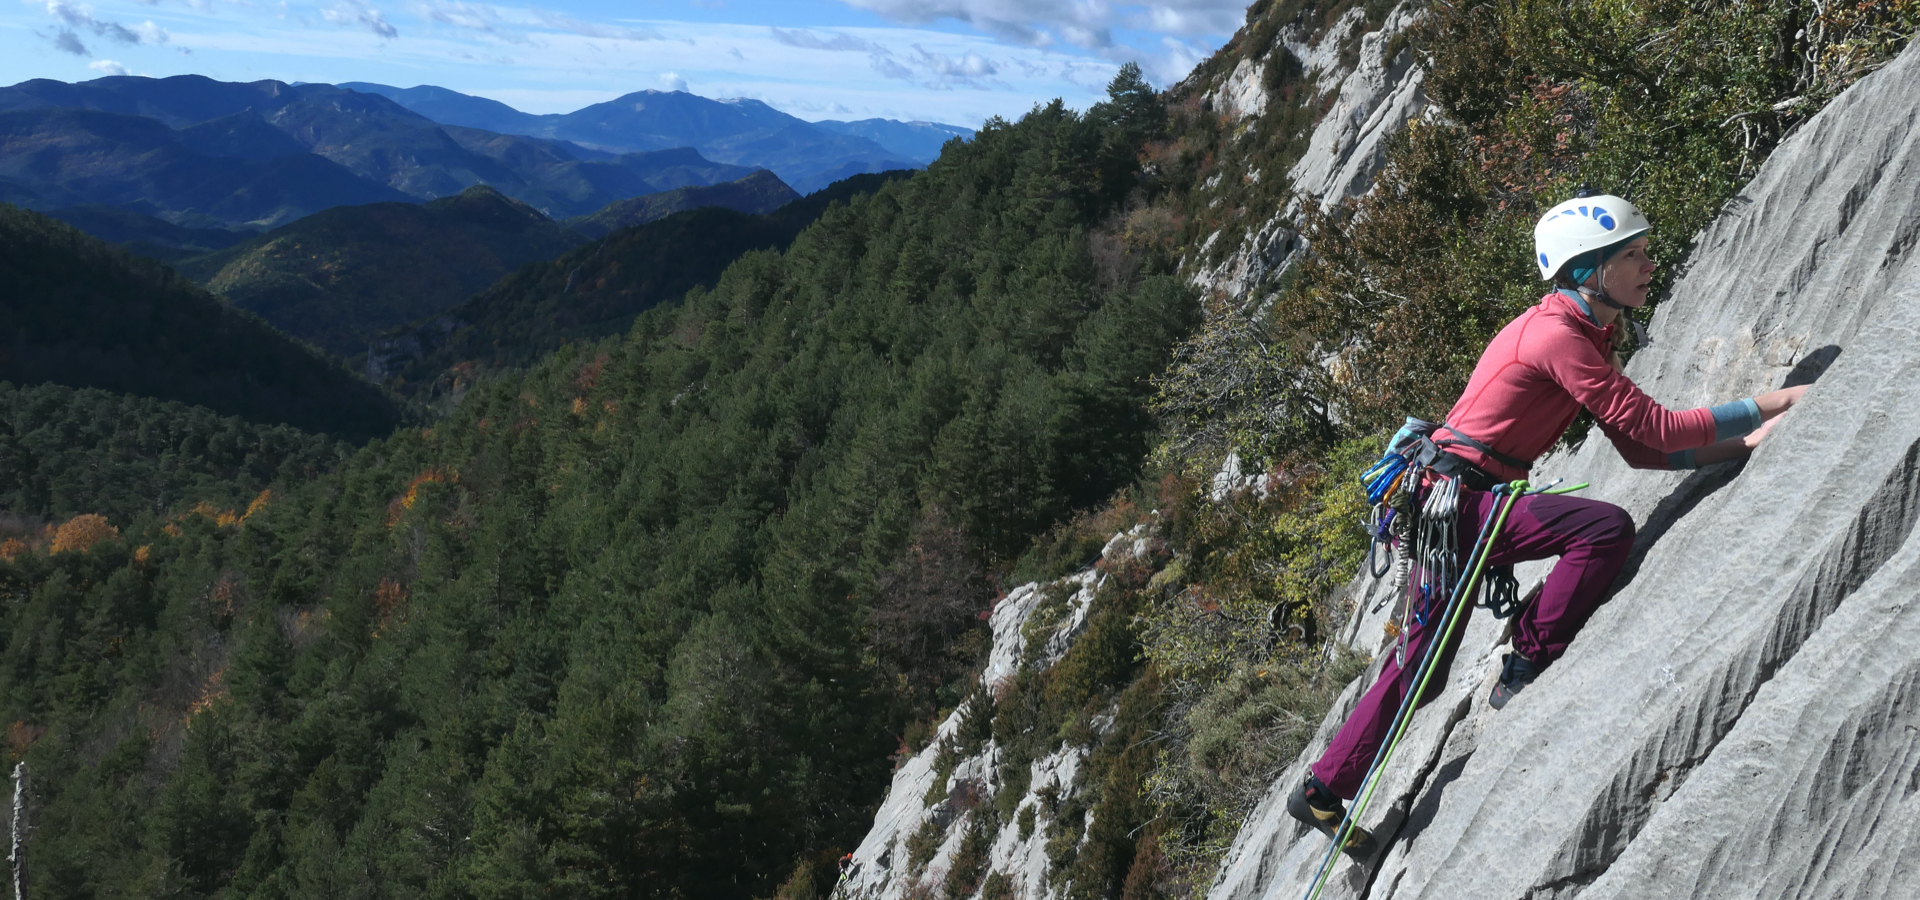 Training courses in climbing and ridges